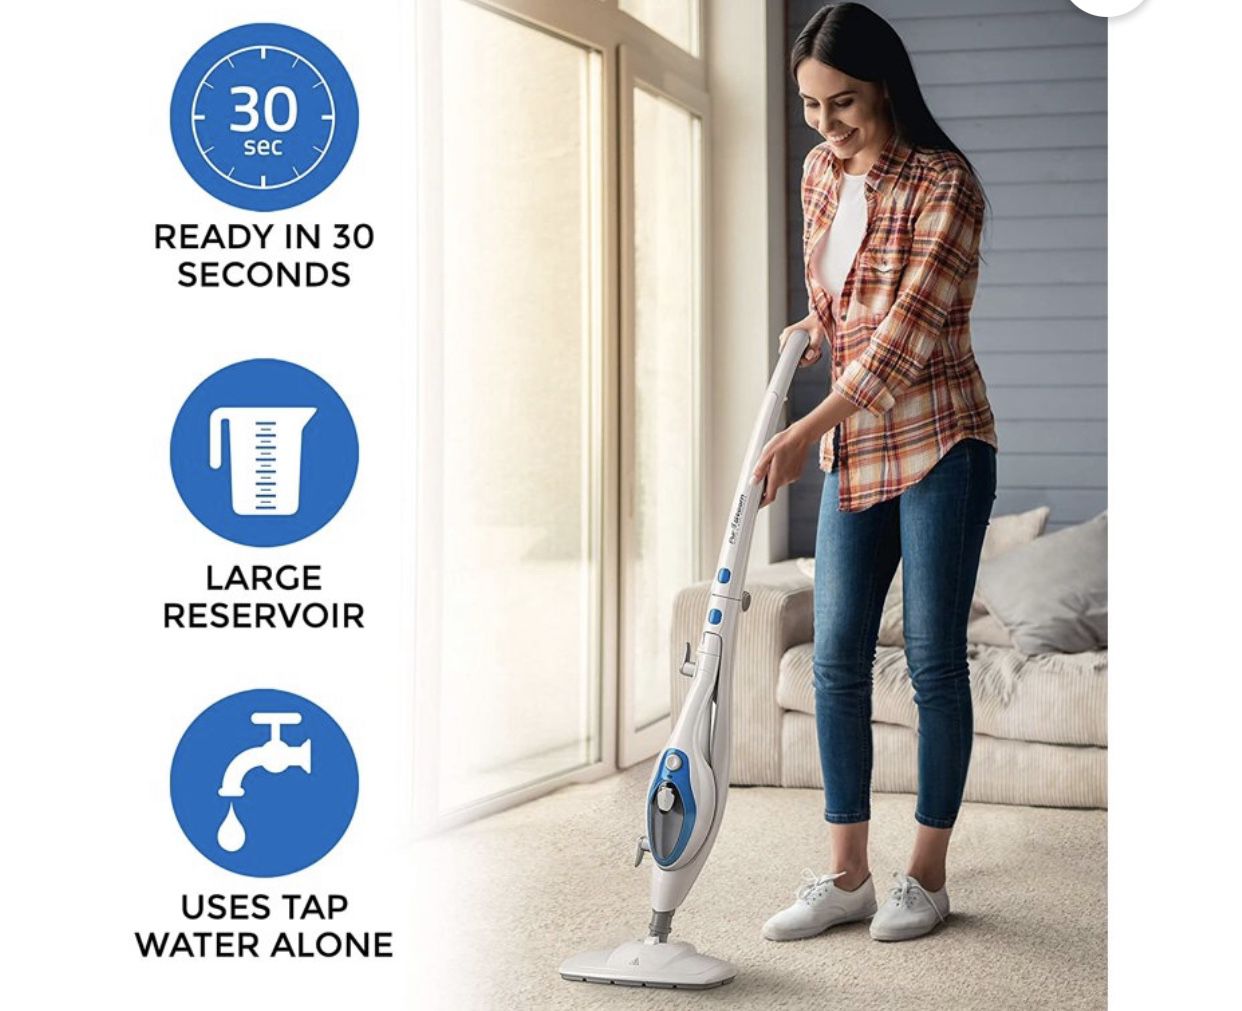 PurSteam Steam Mop with Removable Handheld Steamer - Tile Cleaner, Hardwood Floor Cleaner, Garment, Carpet, Furniture, Kitchen, Windows, Compact with 